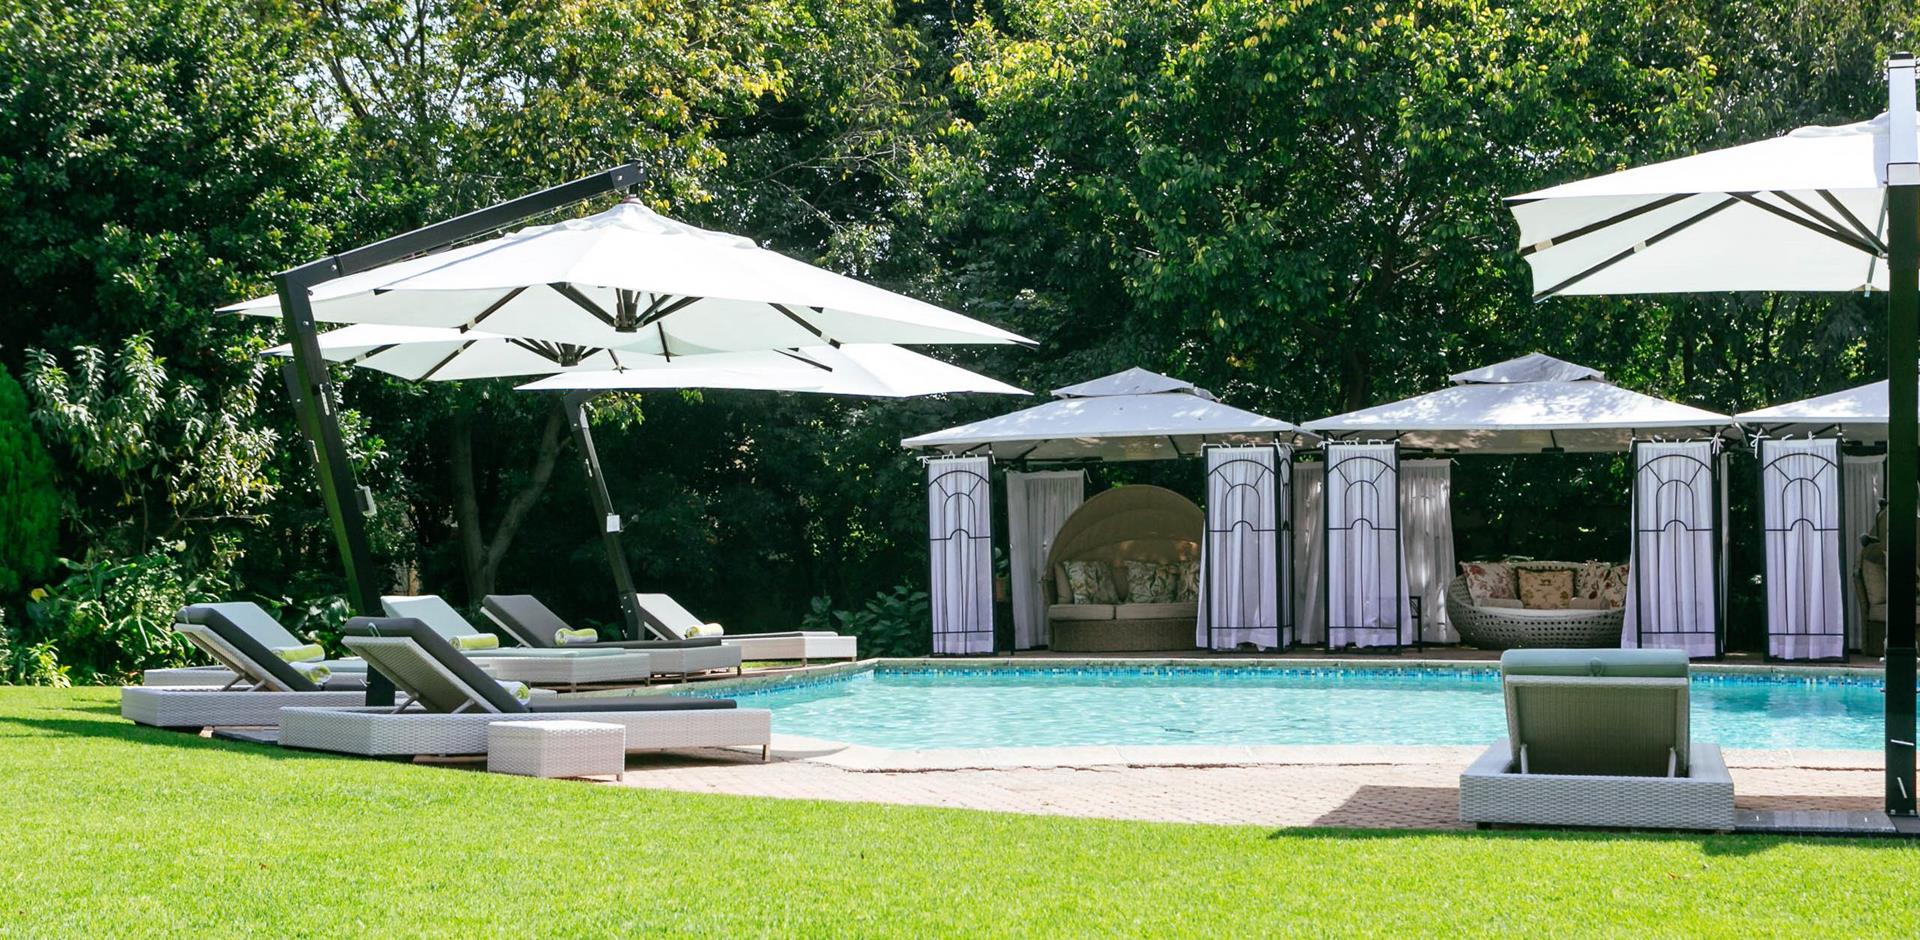 Poolside, Fairlawns Boutique Hotel & Spa, South Africa, A&K